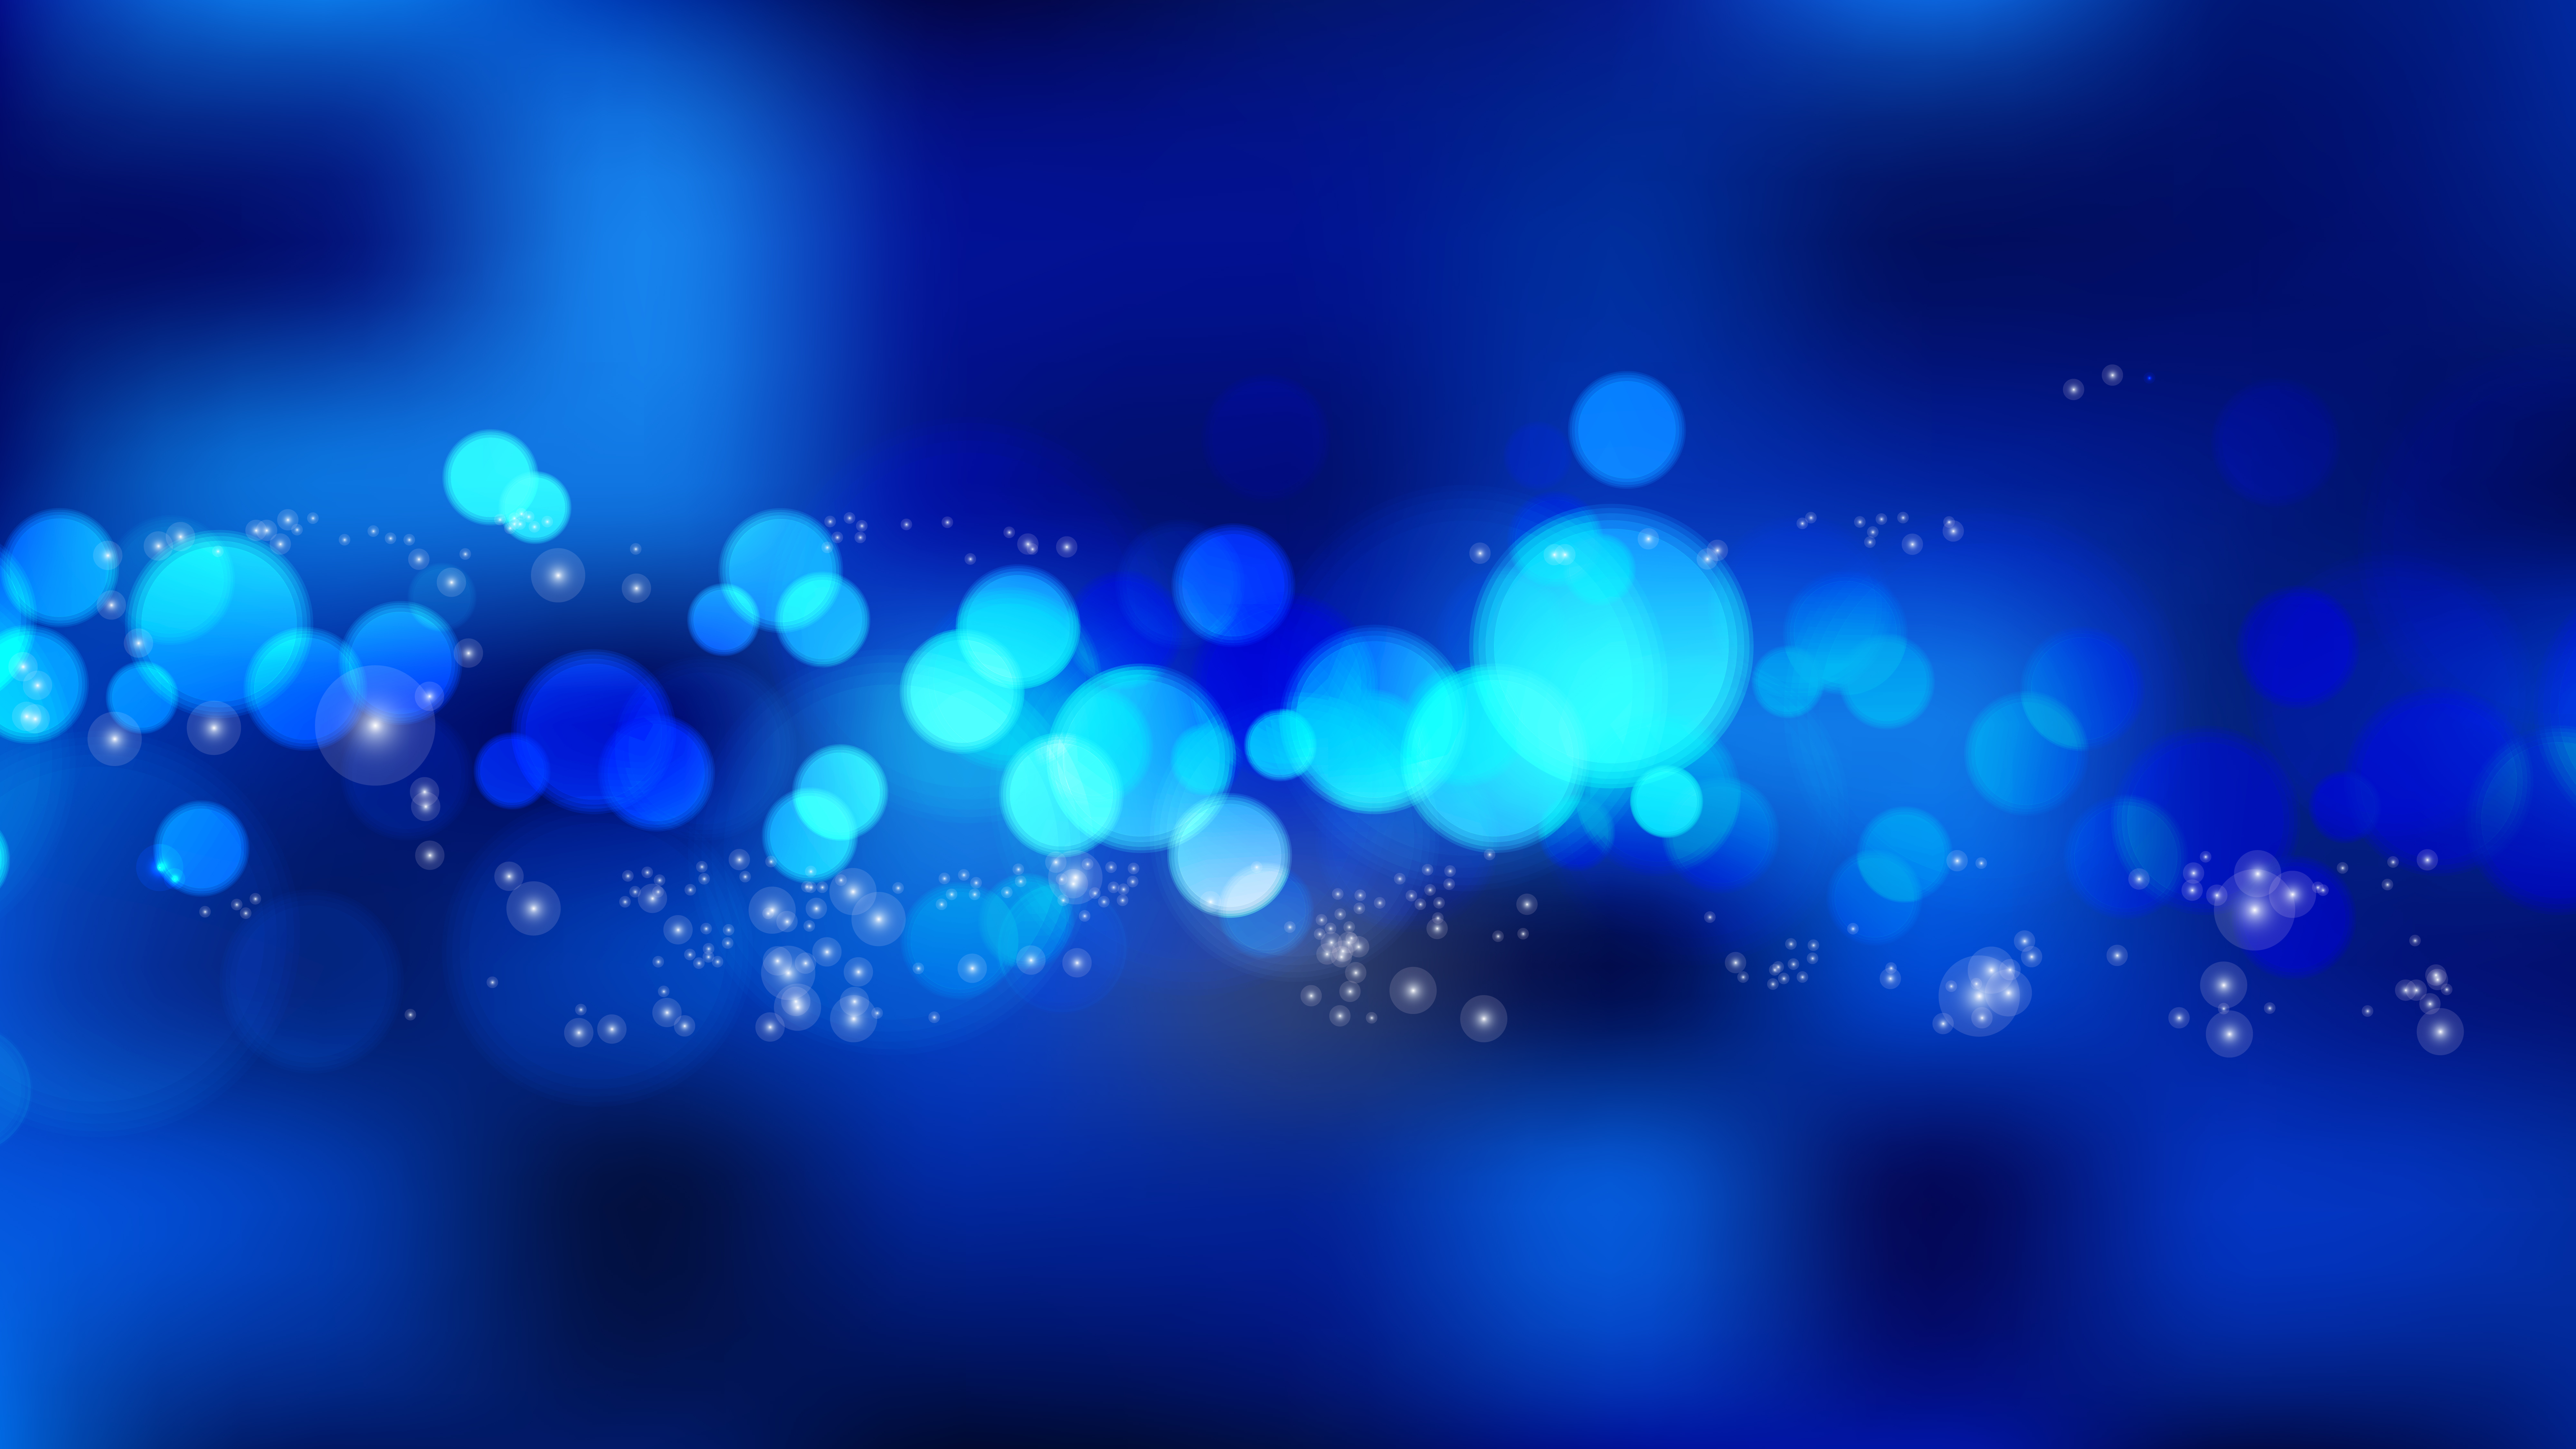 🔥 Download Abstract Dark Blue Blurred Lights Background Illustrator By